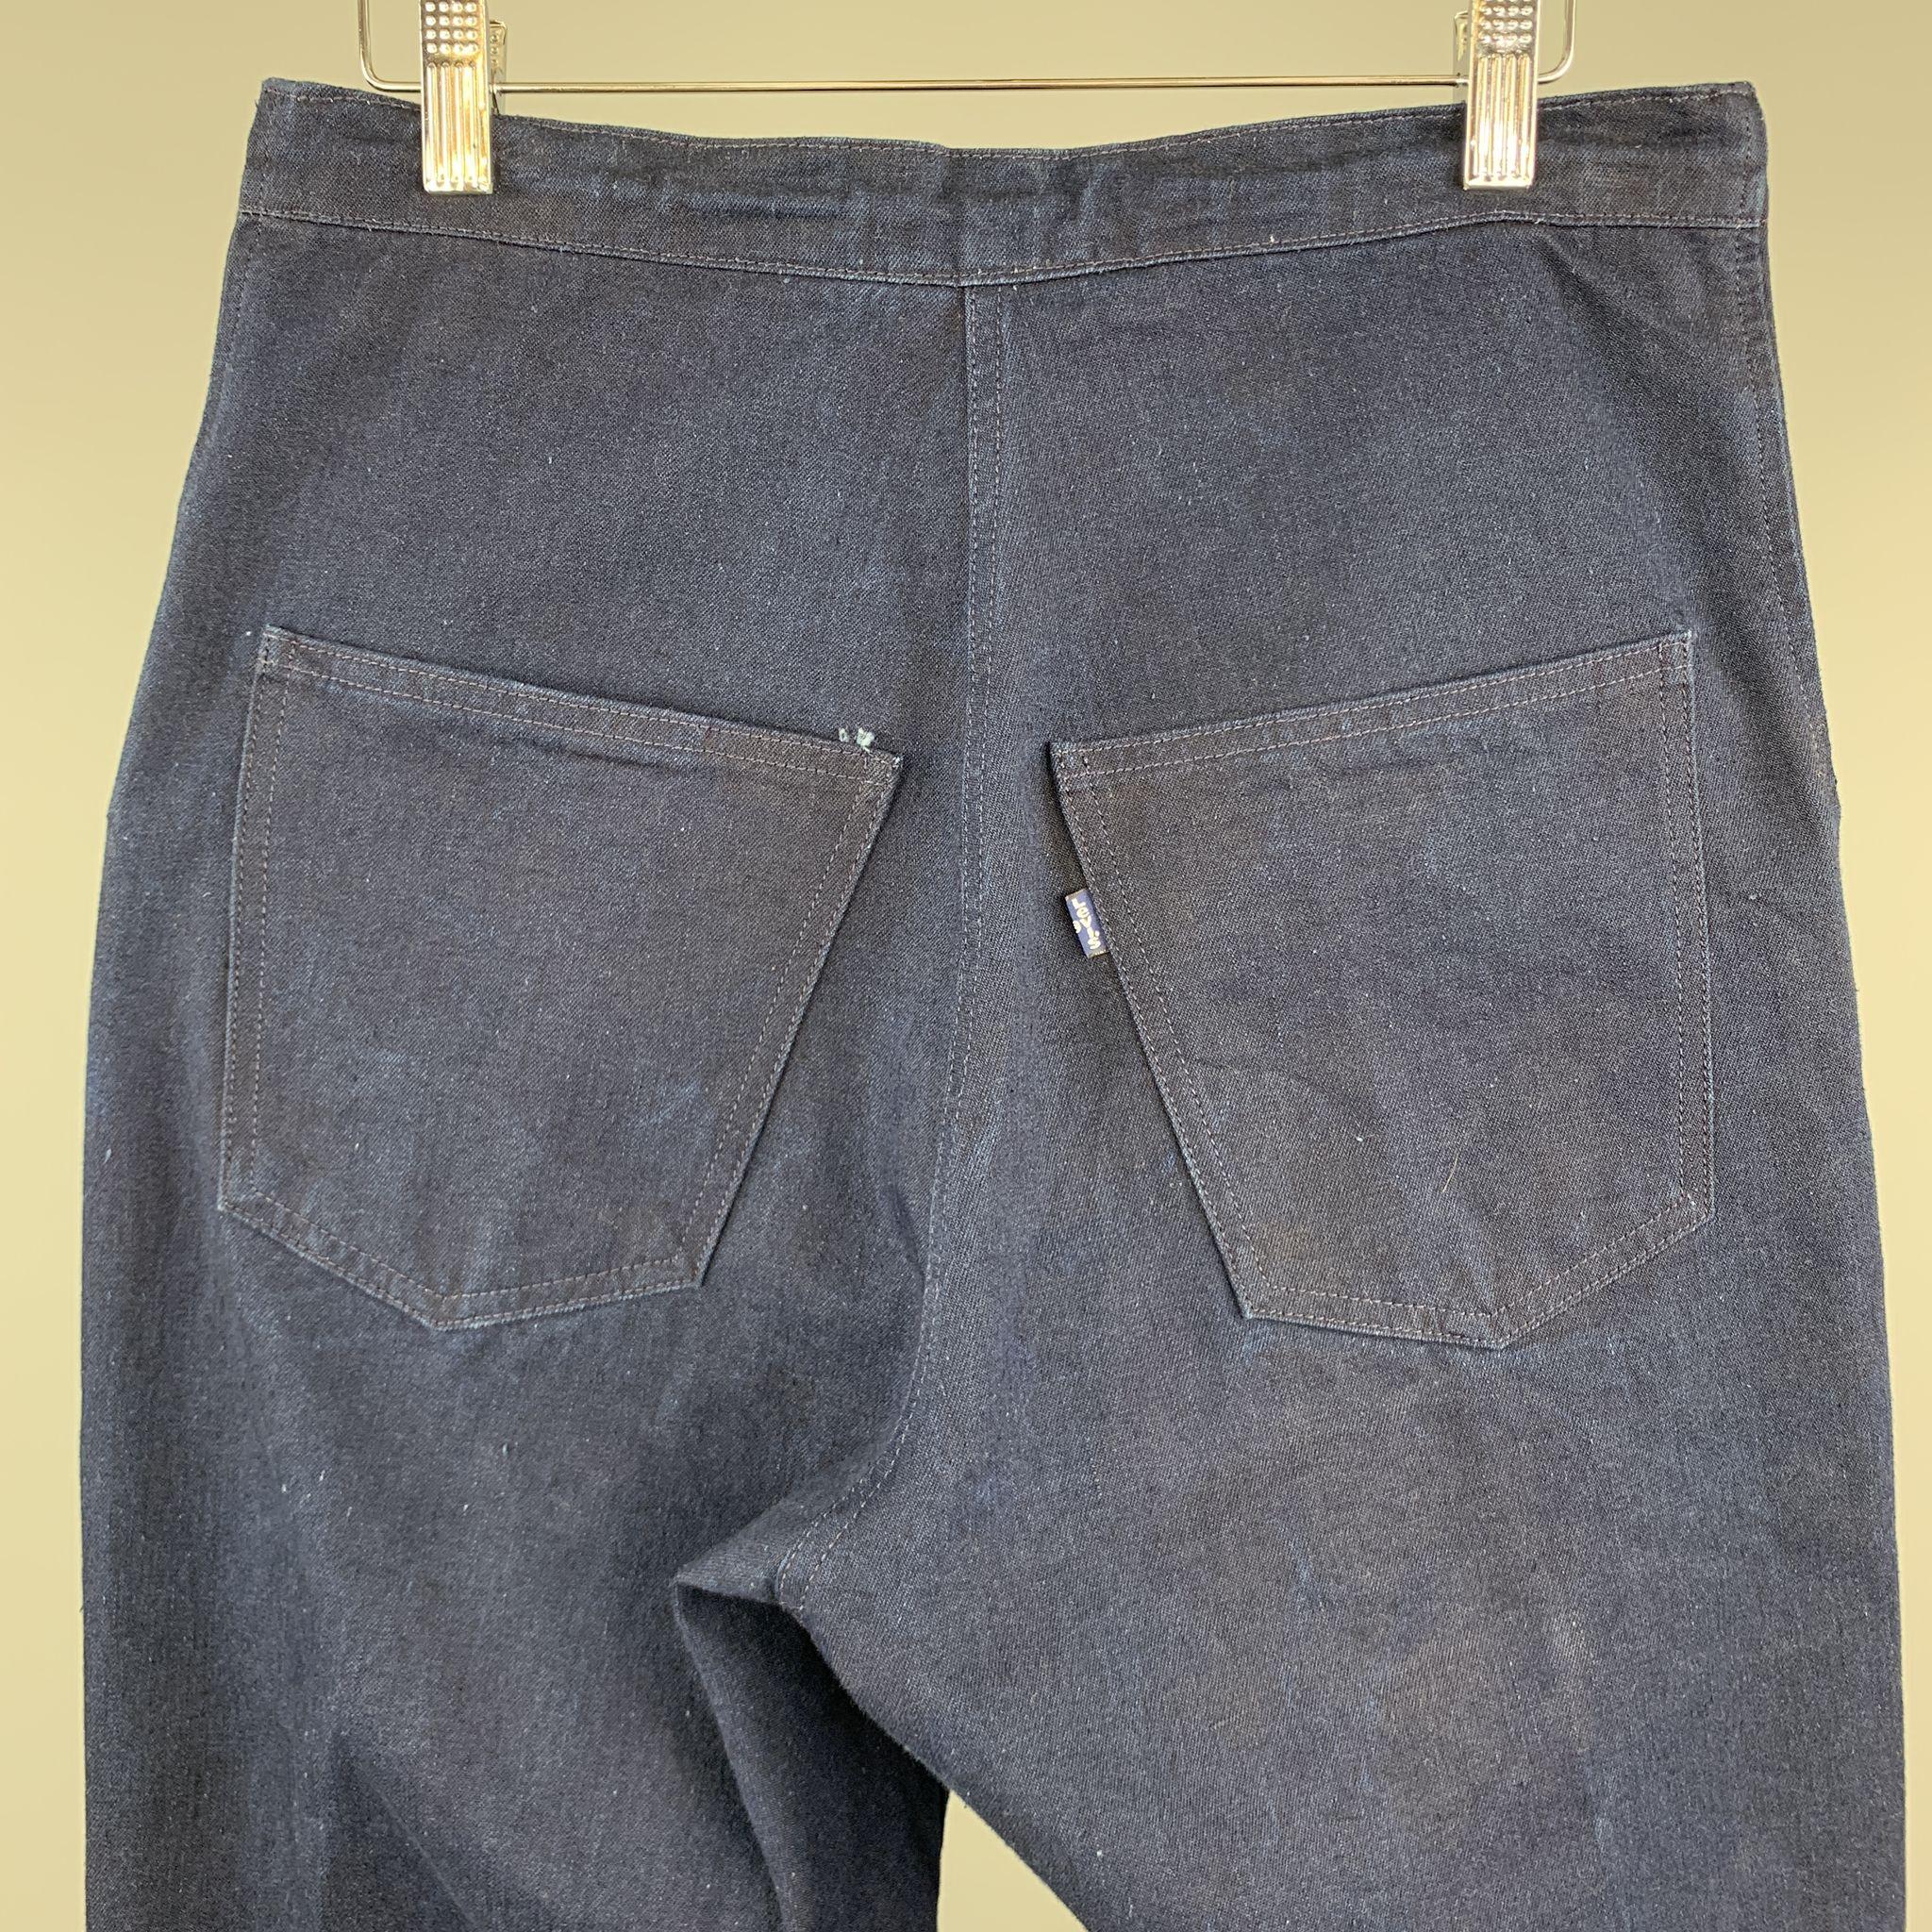 Purple LEVI'S MADE & CRAFTED Size 30 x 28 Indigo Cotton Casual Pants